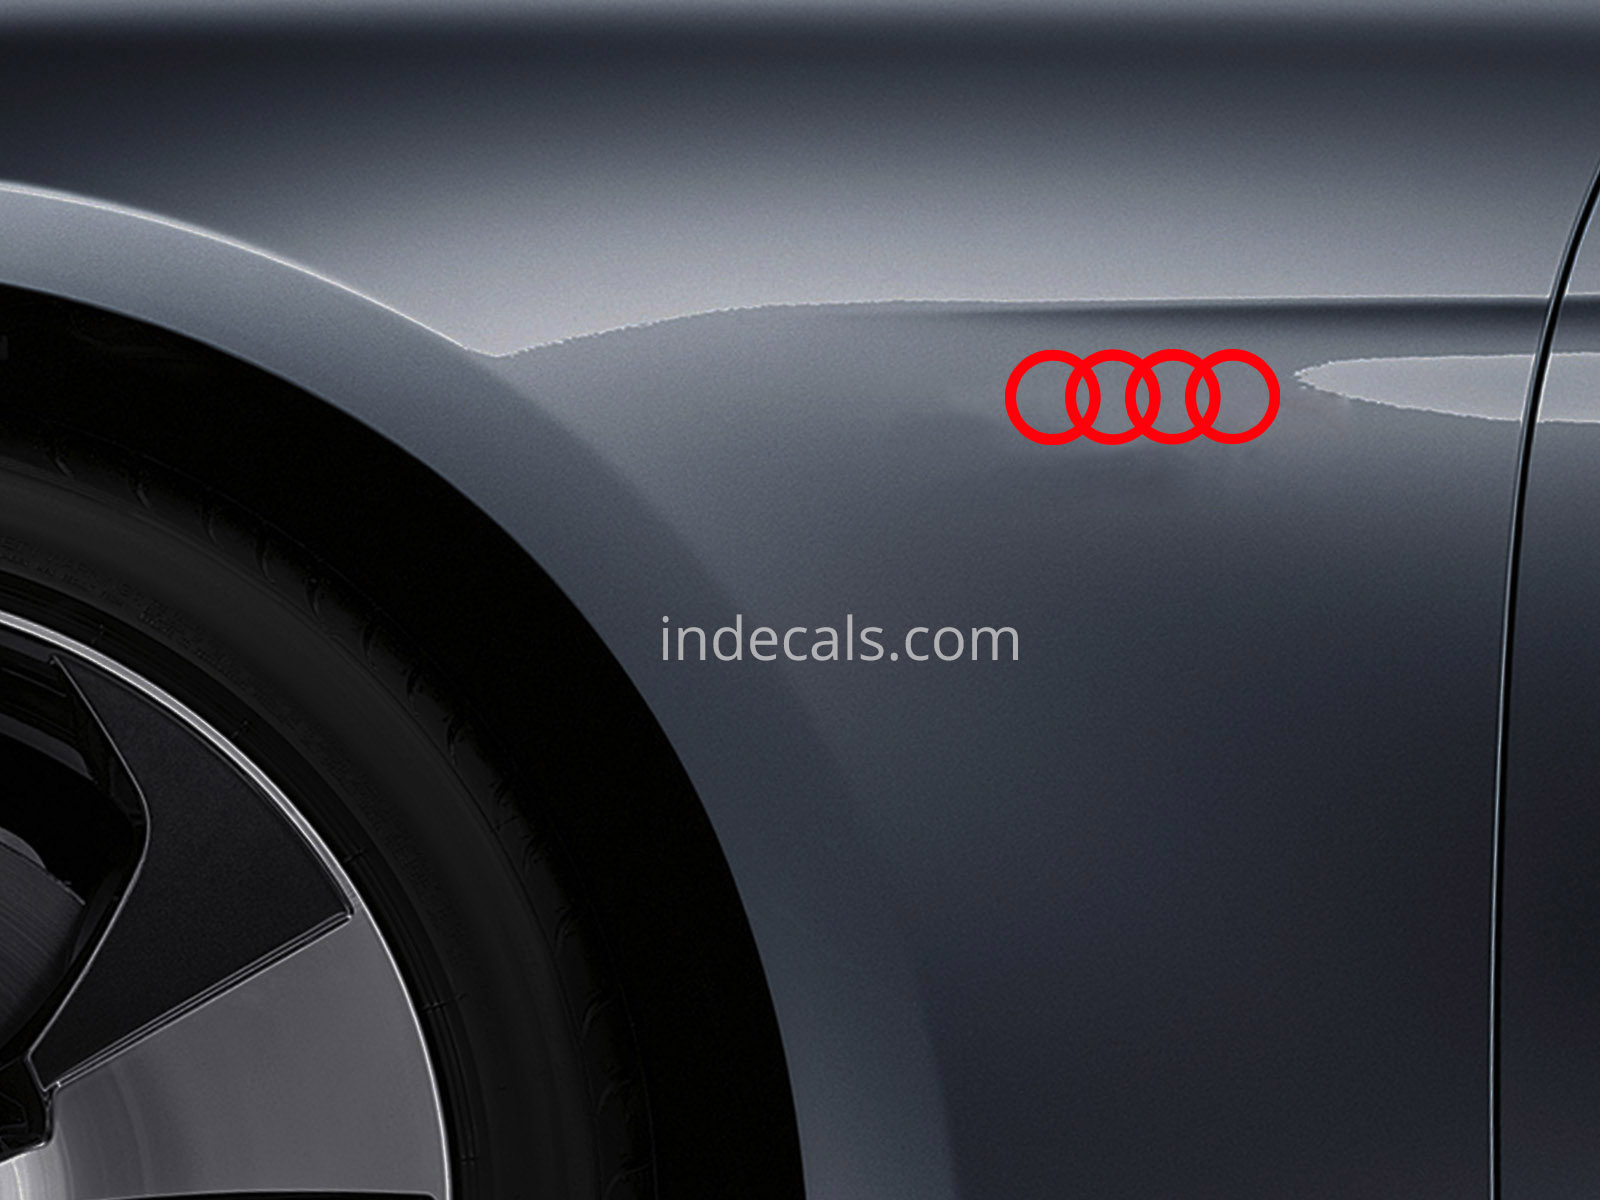 3 x Audi Rings Stickers for Wings - Red